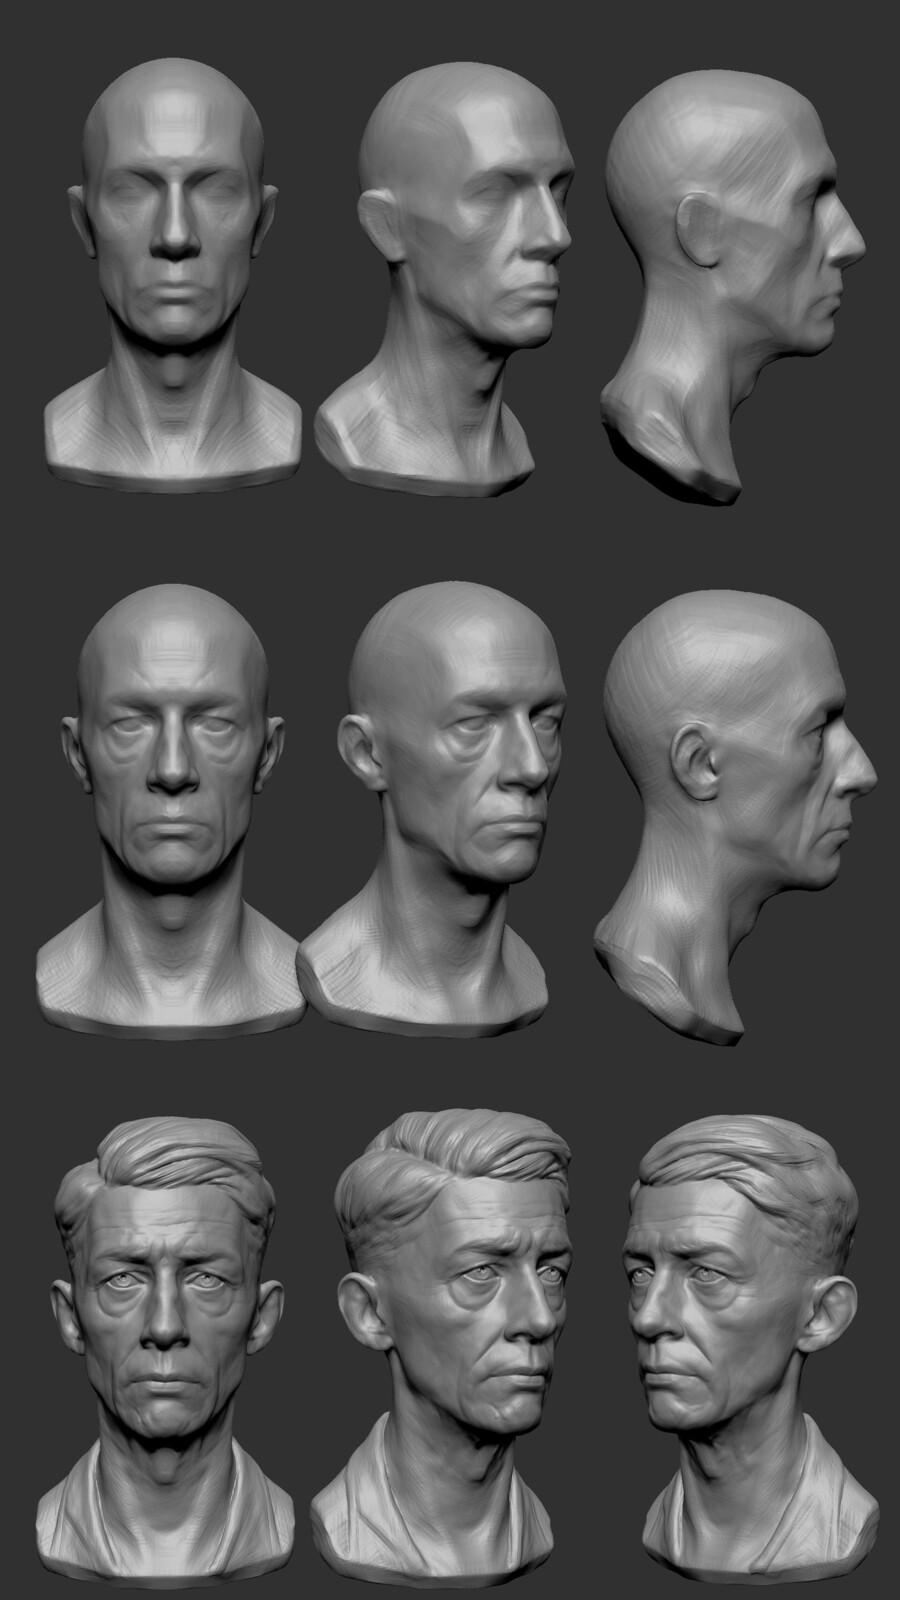 Some people asked about process, unfortunately I don't have a video but this shows the progress. As you can see, I don't really get the likeness until the final stages of the sculpt.
